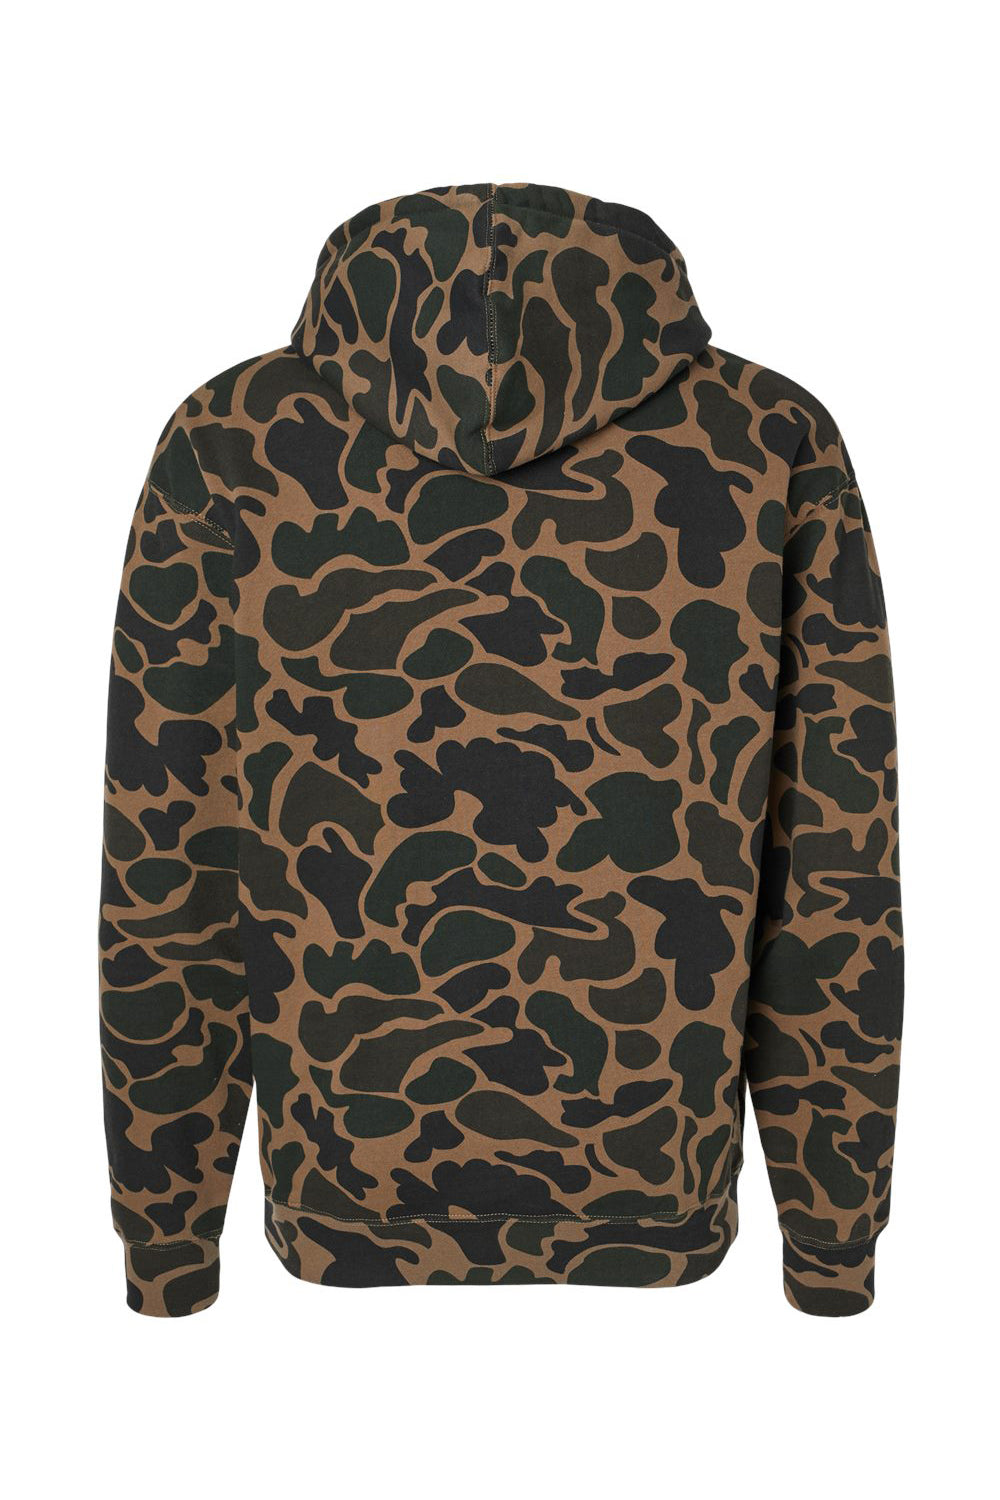 Independent Trading Co. IND4000 Mens Hooded Sweatshirt Hoodie Duck Camo Flat Back